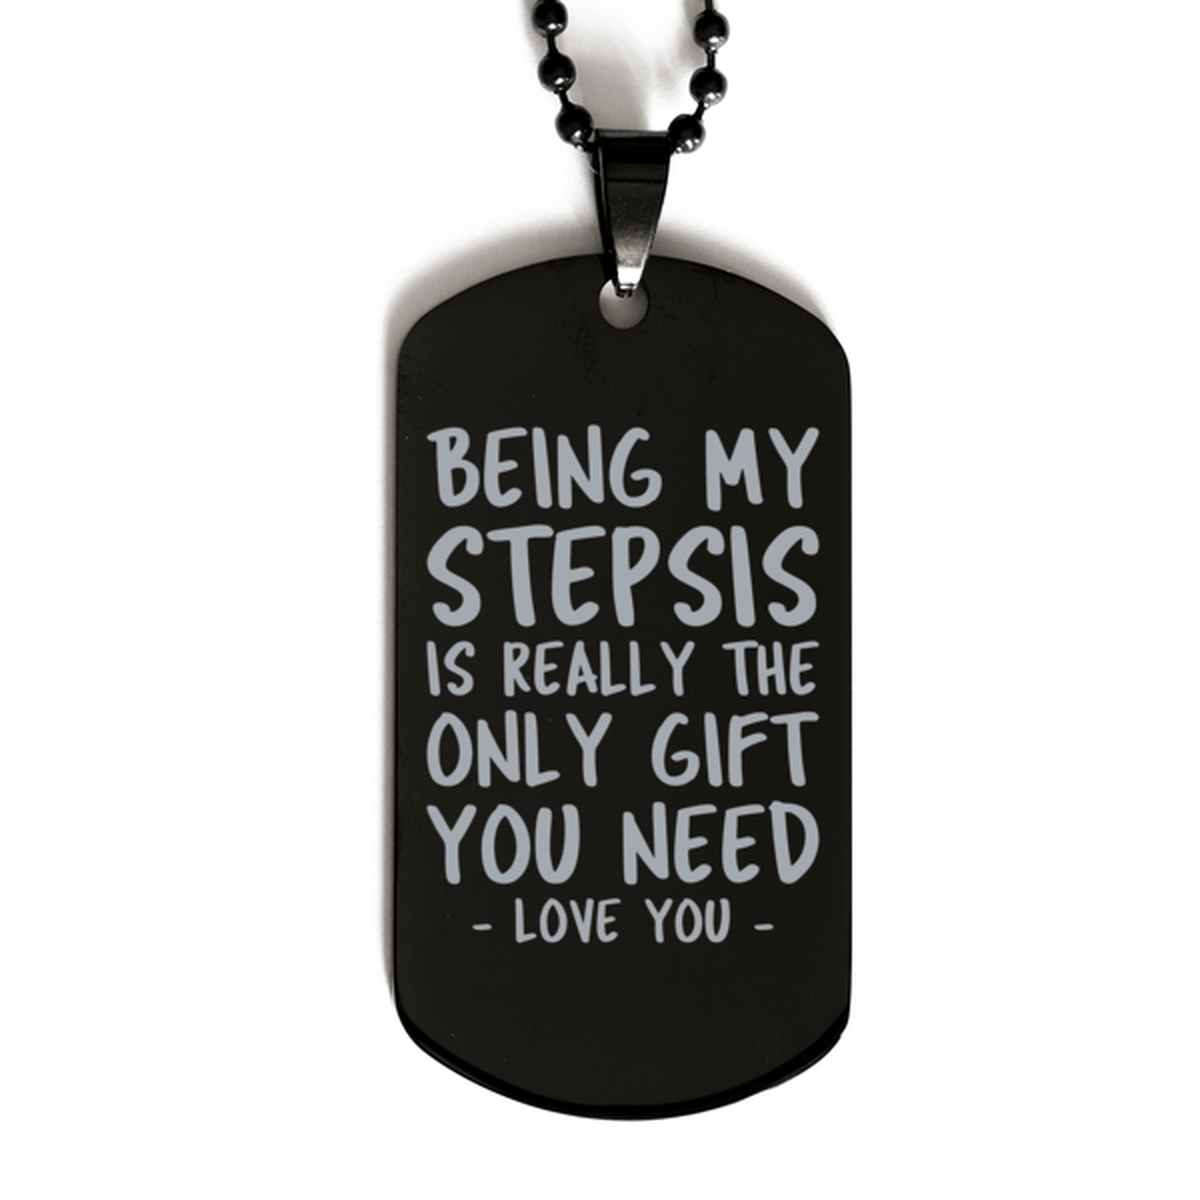 Funny Stepsis Black Dog Tag Necklace, Being My Stepsis Is Really the Only Gift You Need, Best Birthday Gifts for Stepsis